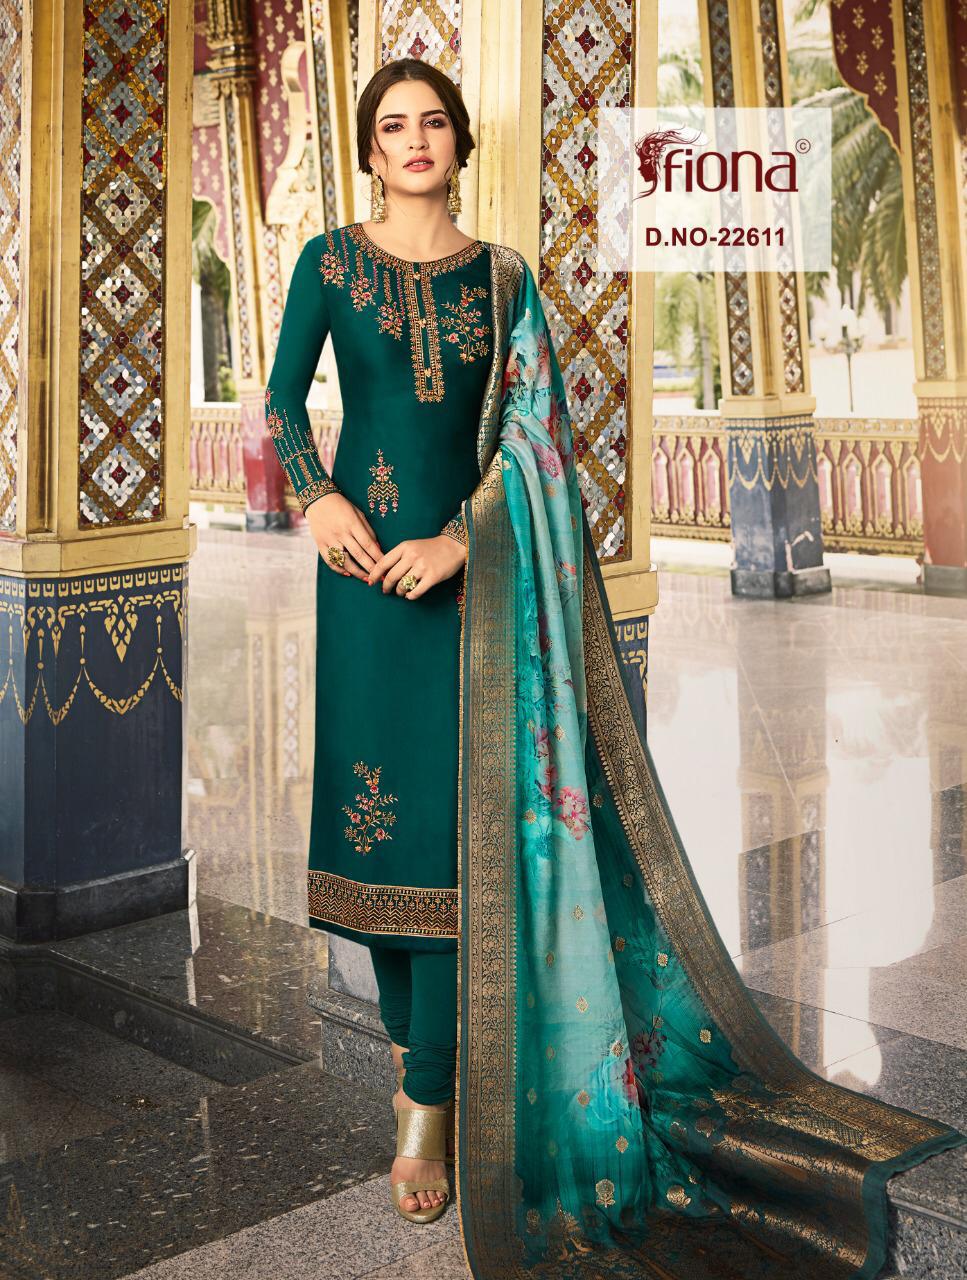 Fiona Presents Nyra Vol-1 Satin Georgette Straight Top With Exclusive Designer Pure Dolla Silk Digital Printed Duppatts Collection